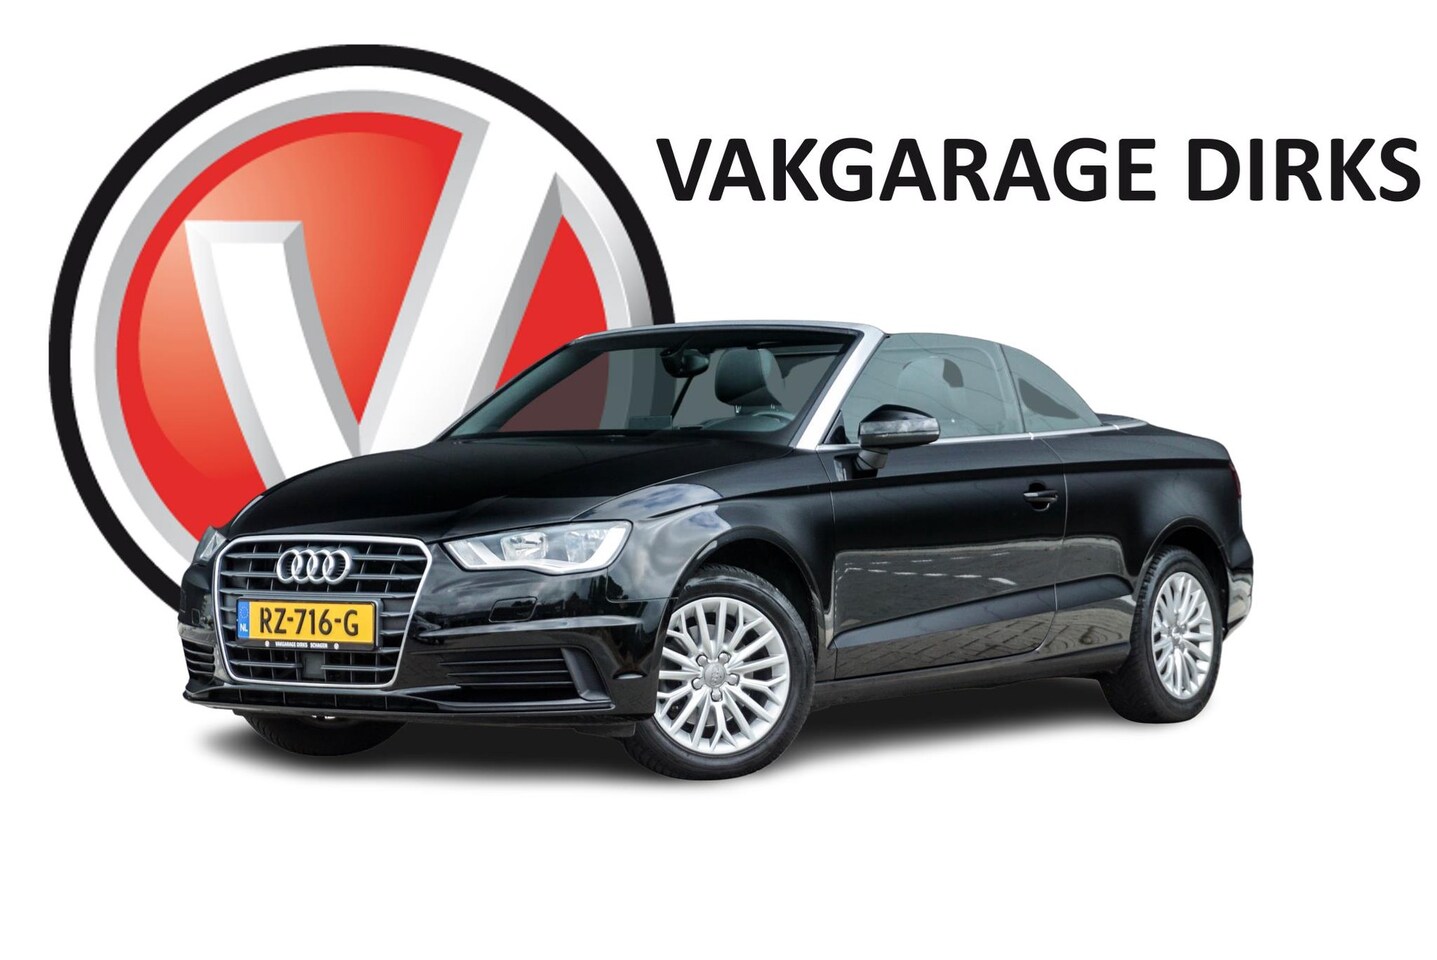 Archeologie geleidelijk Geboorteplaats audi a3 netherlands used – Search for your used car on the parking